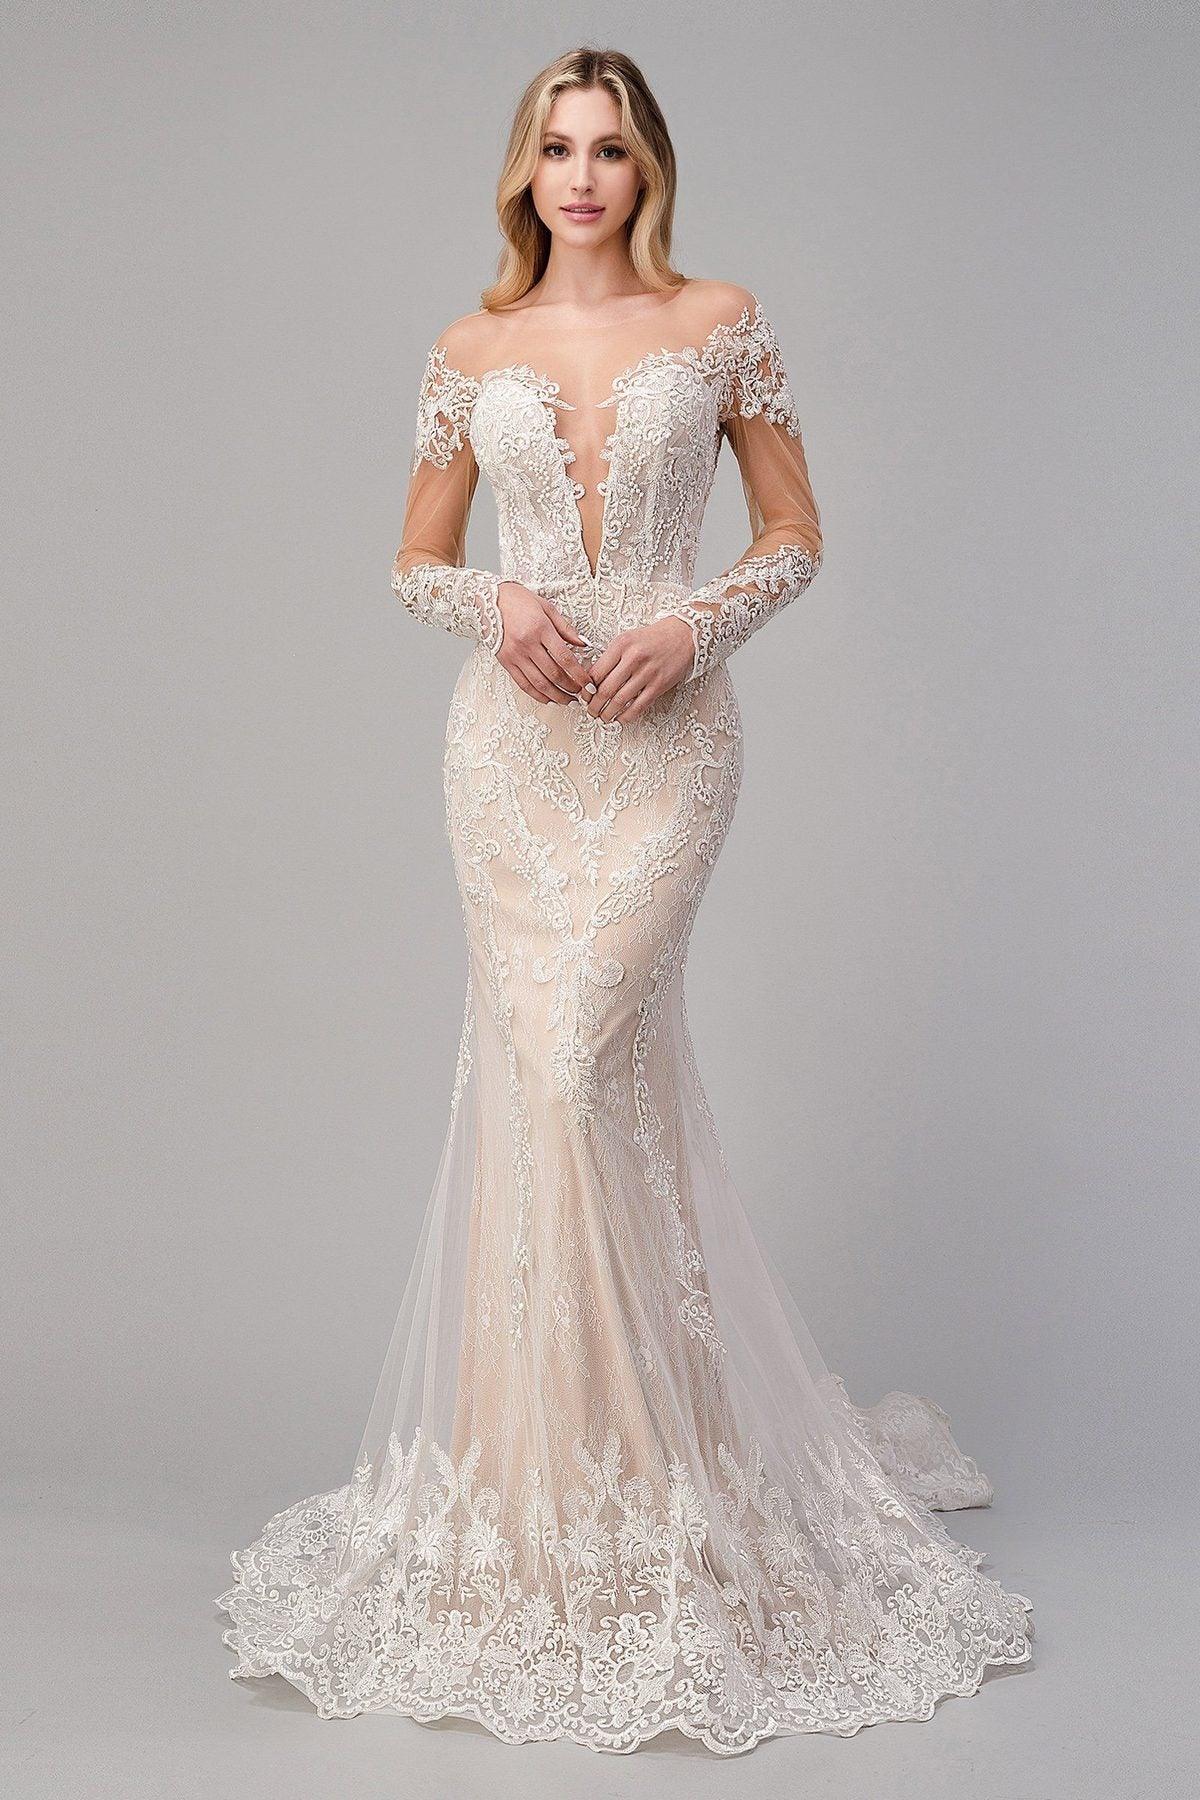 Long Sleeve Lace Bridal Wedding Gown Sale - The Dress Outlet